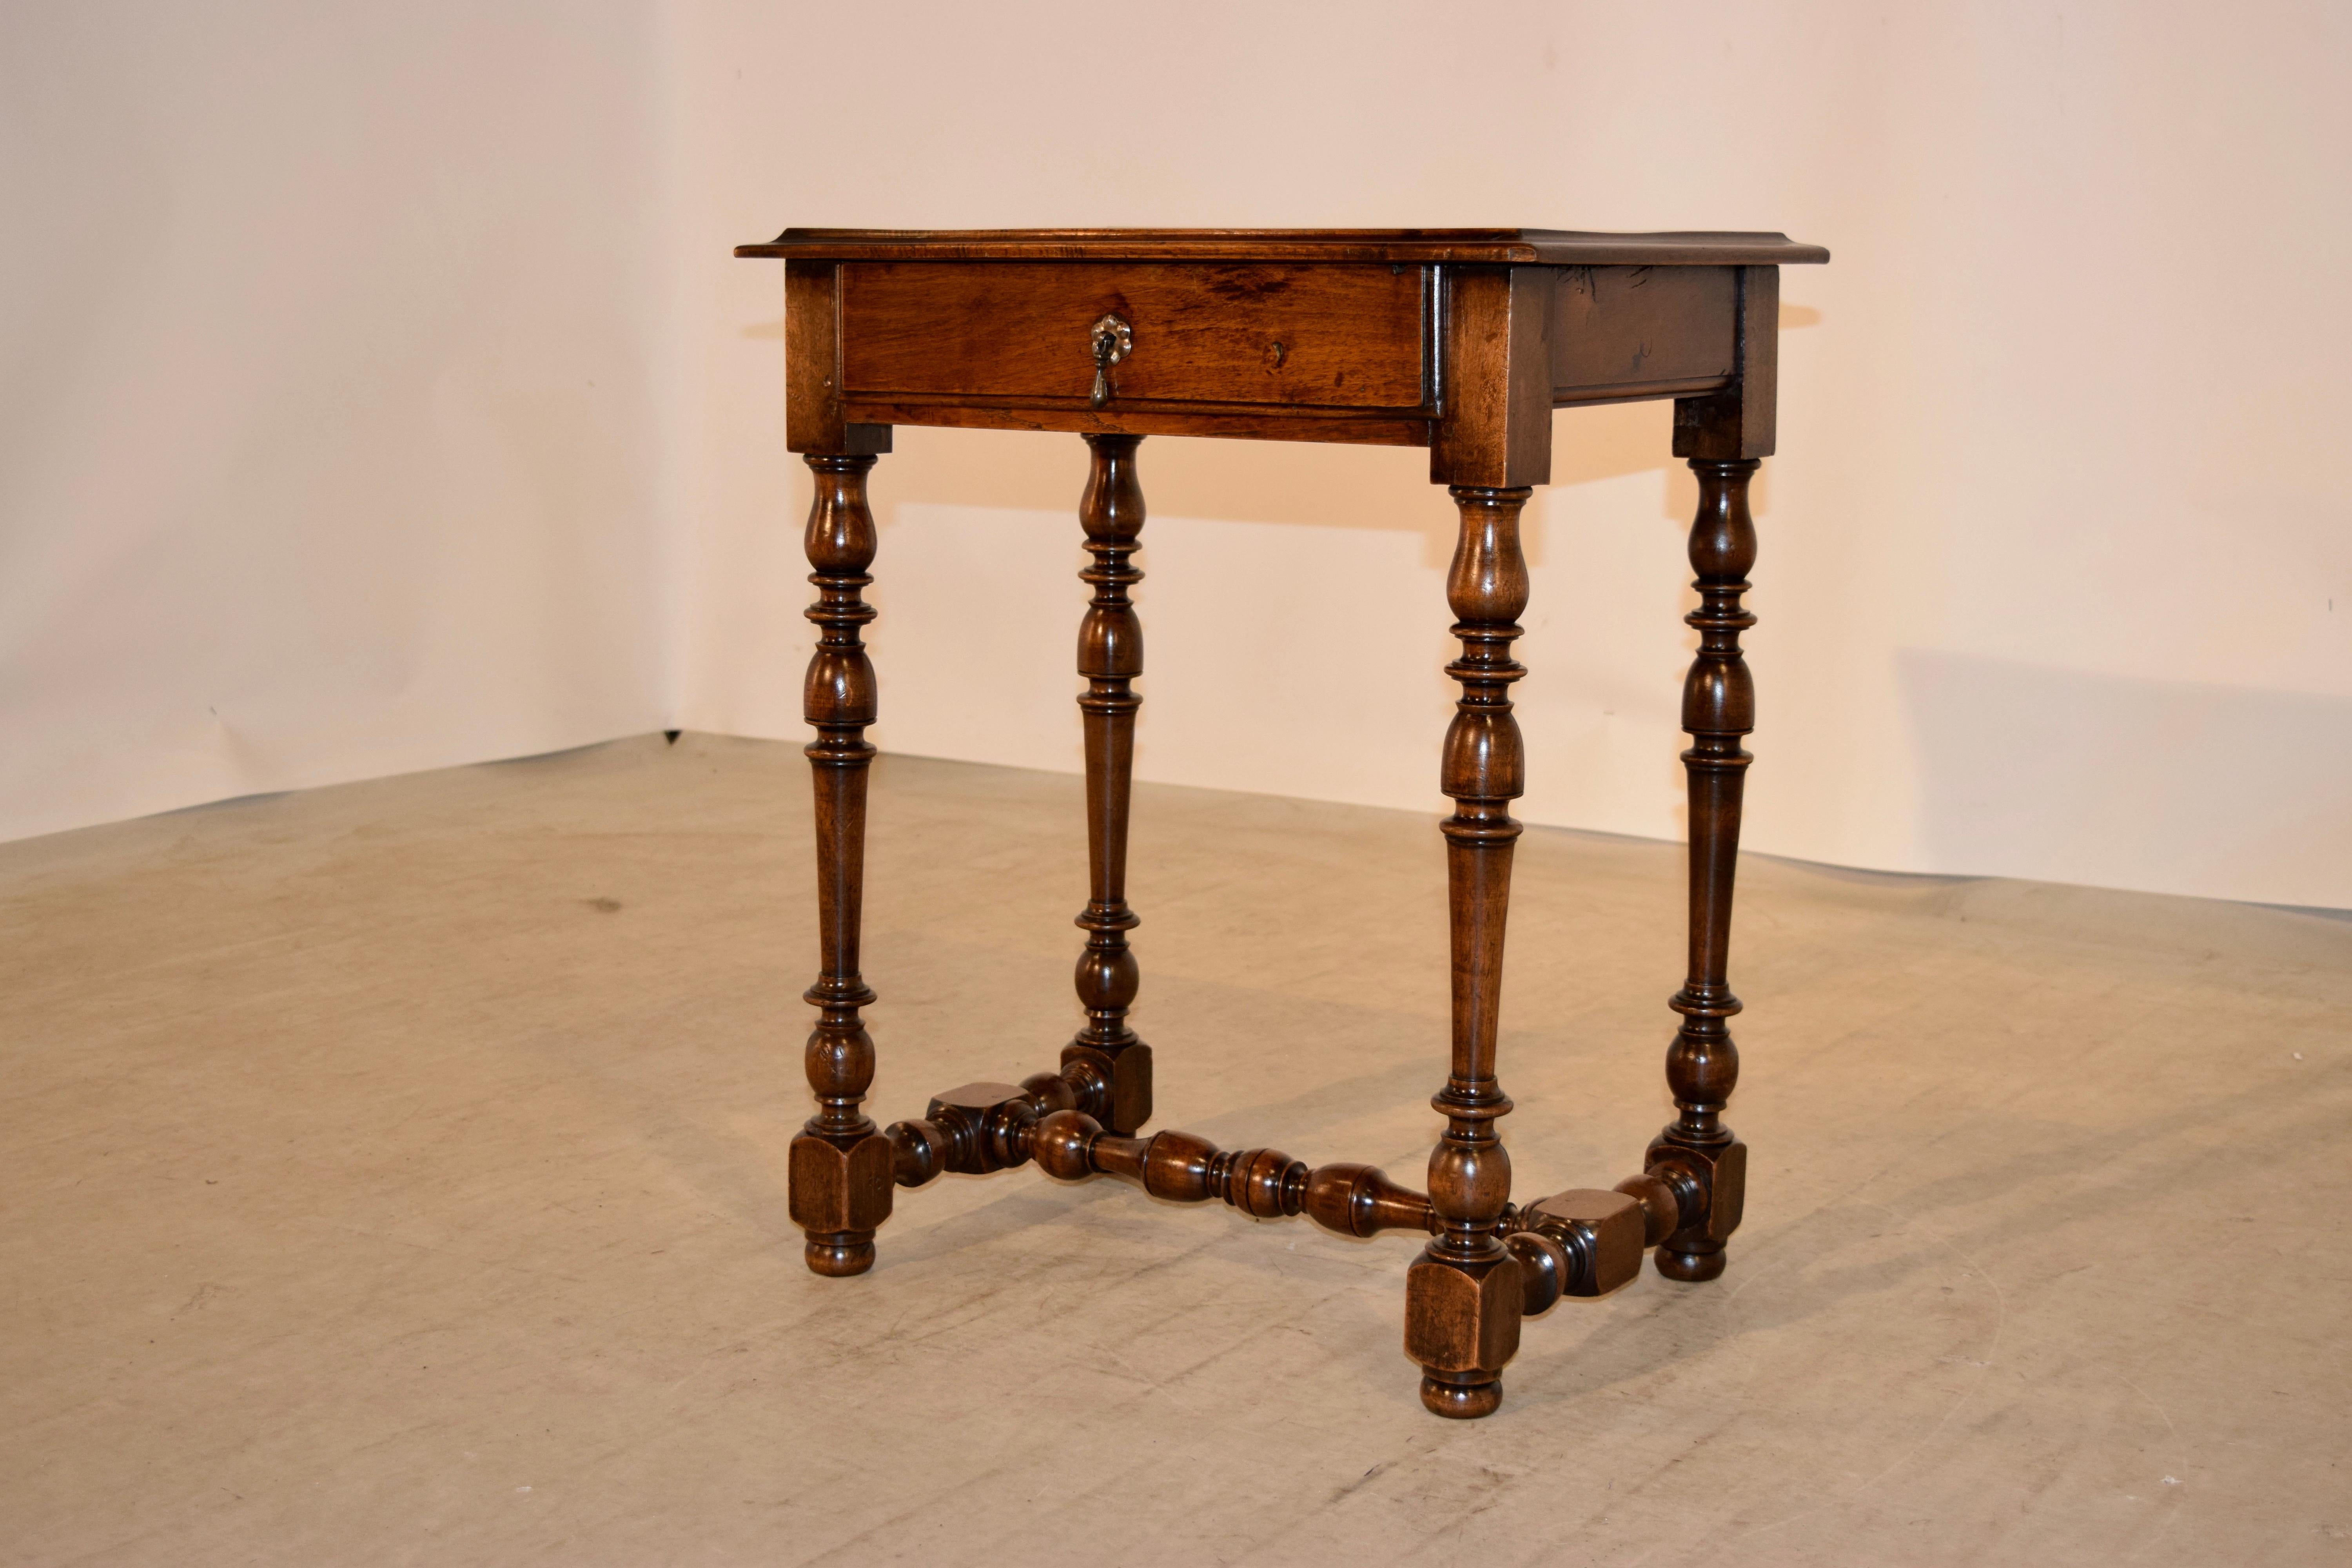 19th century walnut side table from France with an exquisitely figured top with a deeply bevelled edge following down to a simple apron and a single drawer. It is supported on hand turned legs joined by matching stretchers and raised on hand turned